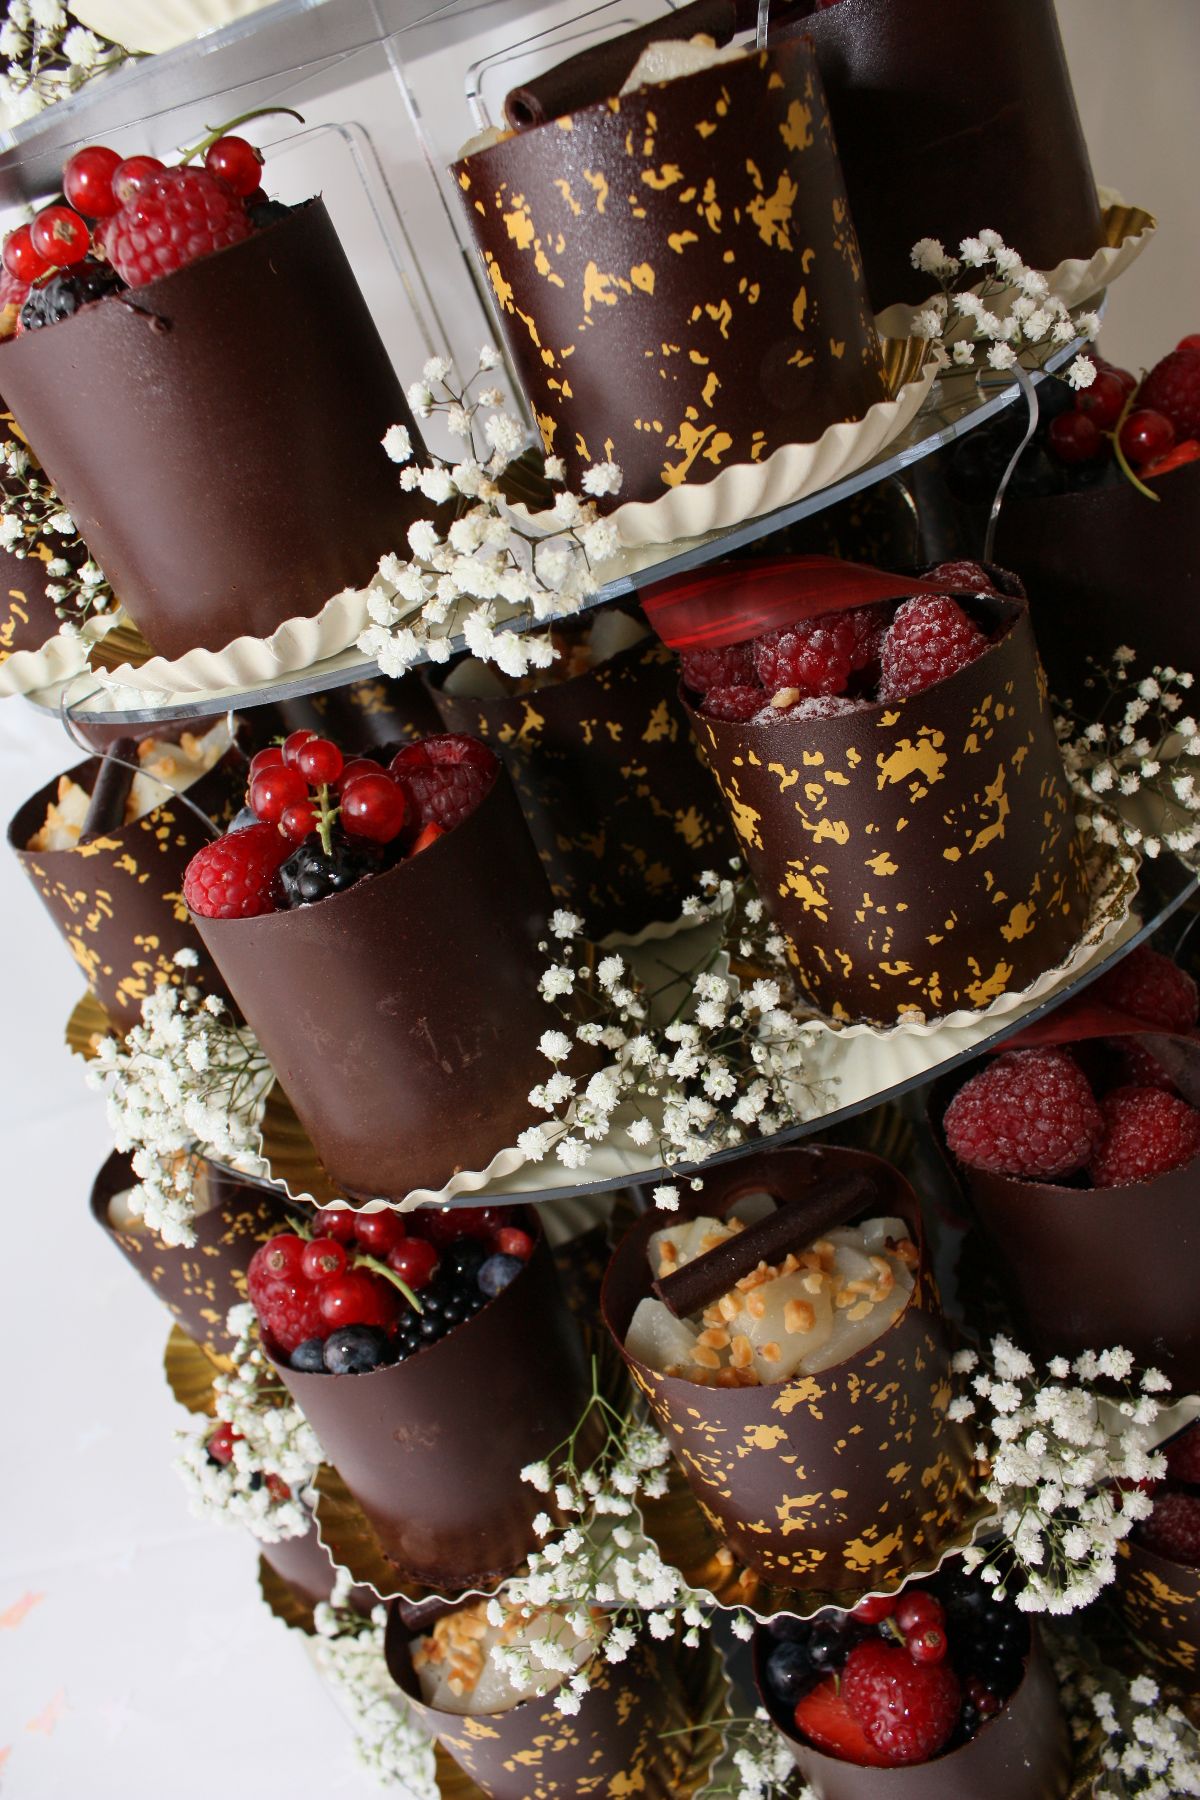 Chocolate delight for the Nigerian wedding guests.